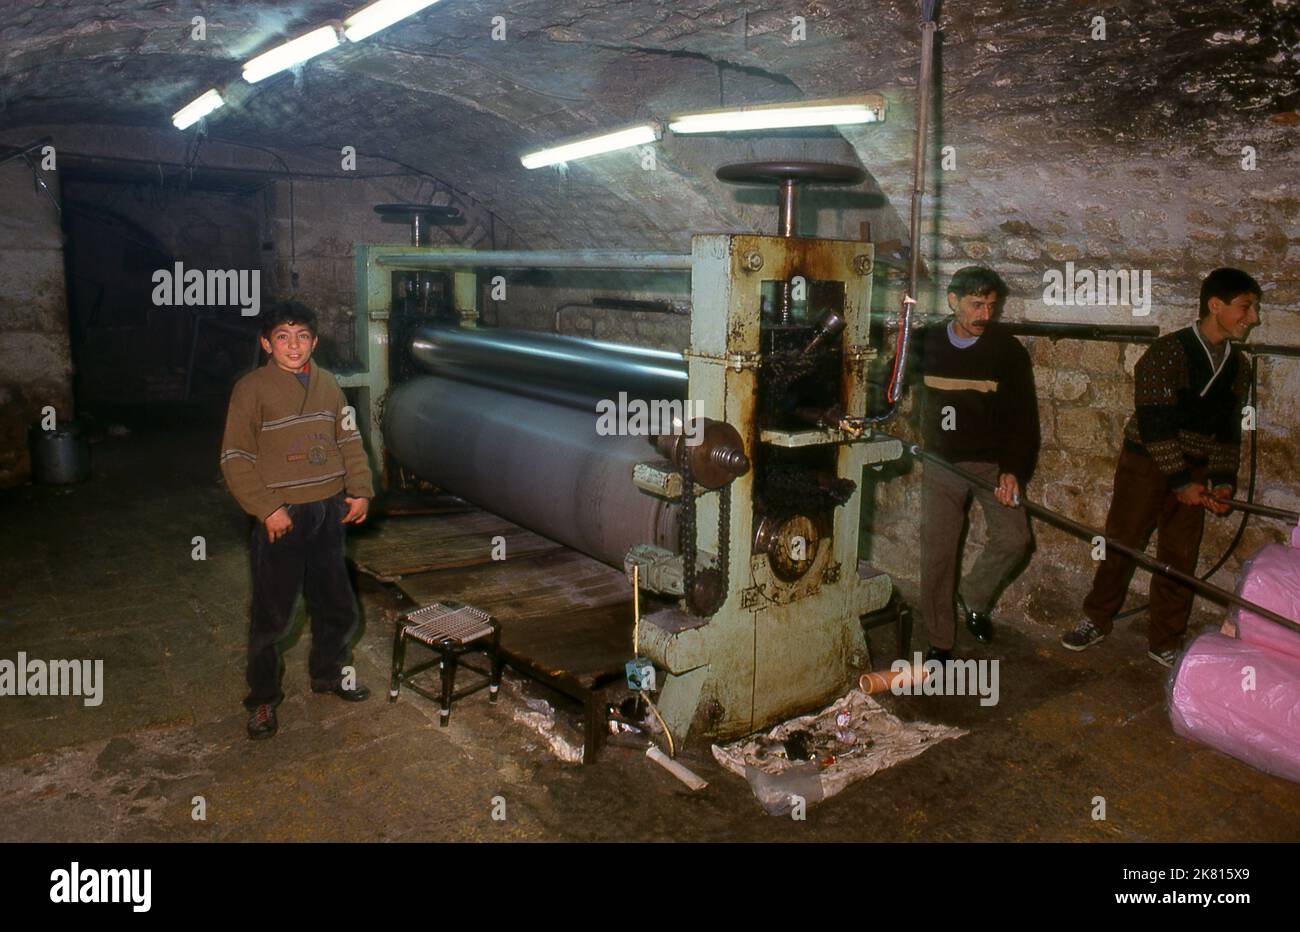 Syria: Subterranean cloth dyeing operation in the ancient Great Bazaar, Aleppo (1997). Aleppo's Great Bazaar (in Arabic, suq or souq) was rebuilt first by the Egyptian Mamelukes who drove out the Mongols, and then, after 1516, by the Turks who incorporated Aleppo into the Ottoman Empire. During the Syrian Civil War, which started in 2011, Aleppo's historic suqs suffered serious damage.  Aleppo, the second city of Syria is possibly the longest continually inhabited settlement in the world. Its Arabic name, Halab, is mentioned in Semitic texts of the third millennium BCE. Stock Photo